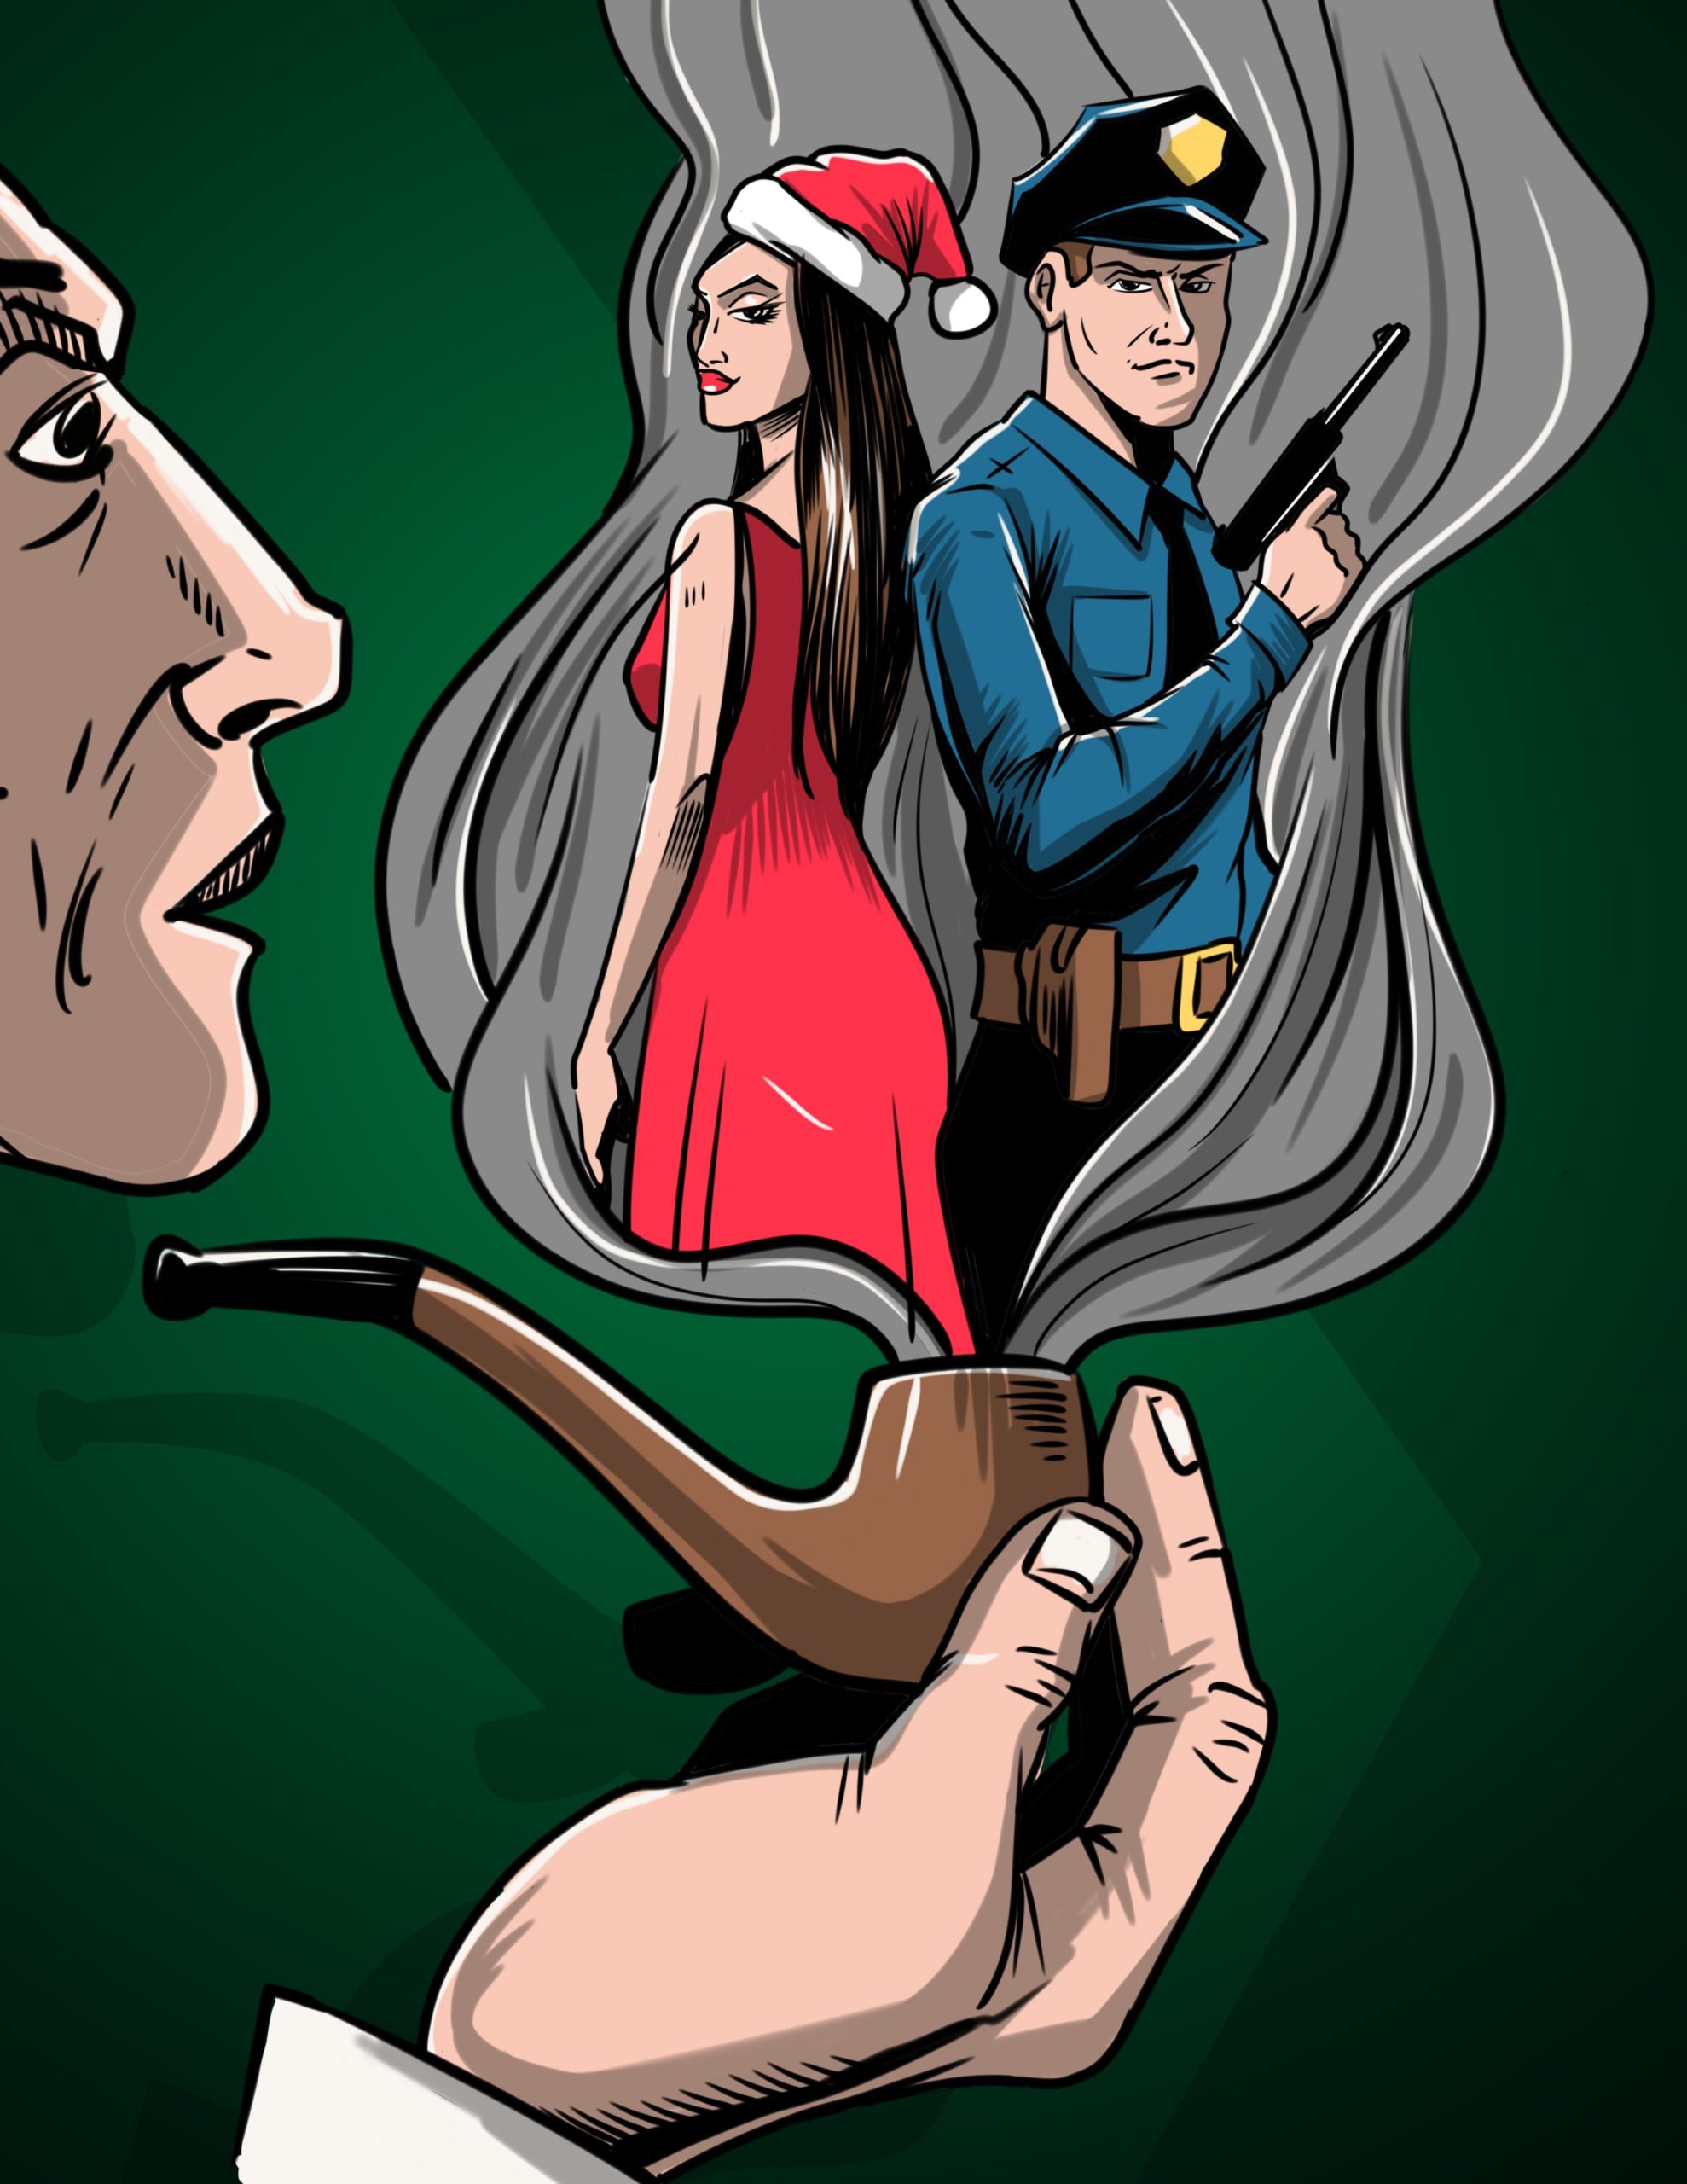 A man smoking a pipe with a woman and police officer appearing in the smoke.